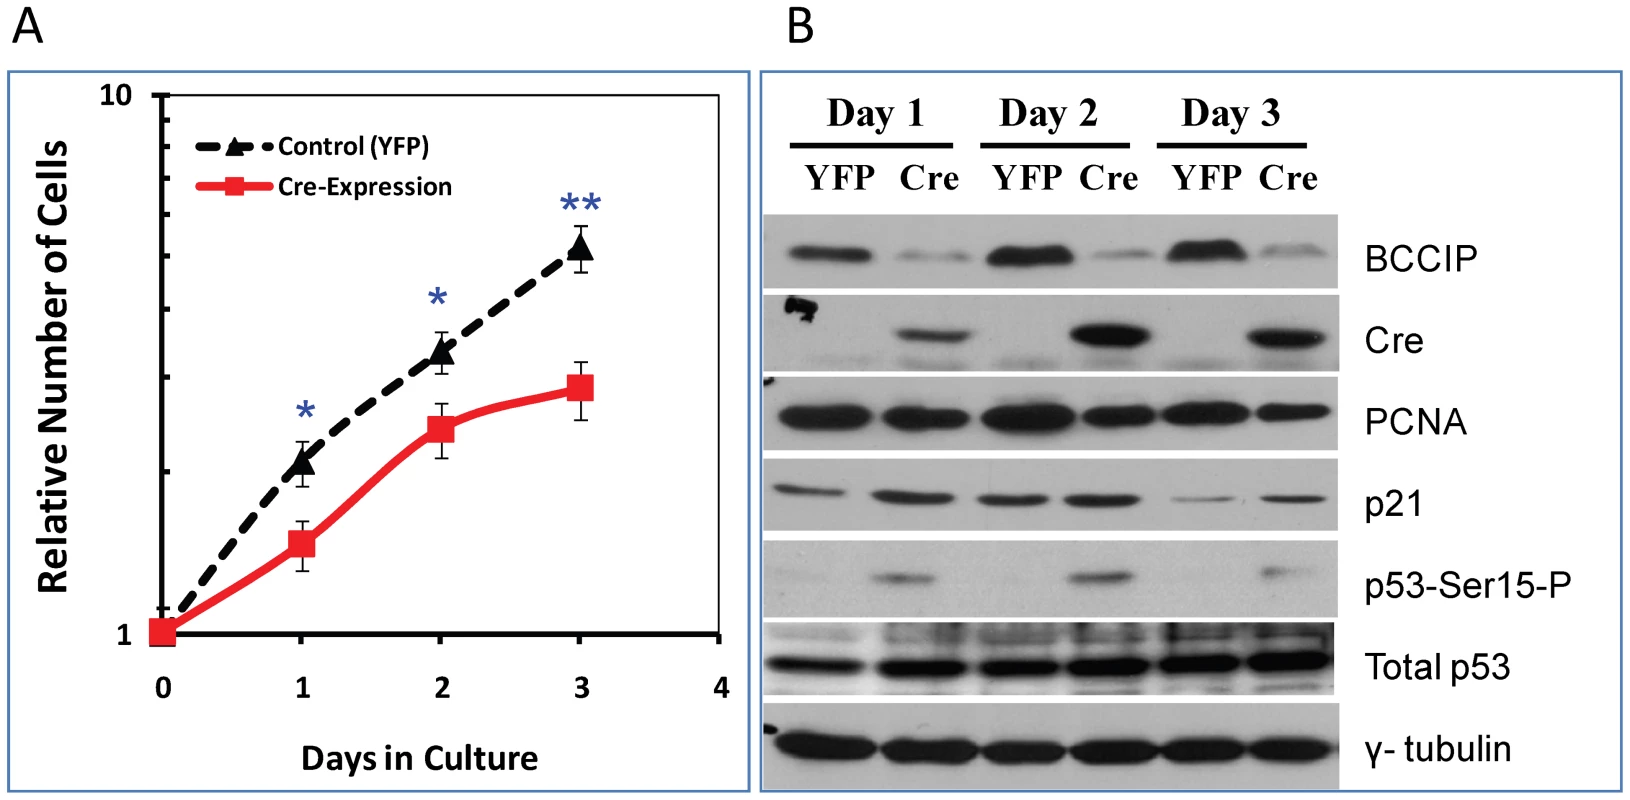 Characterization of BCCIP-deficient mouse embryo fibroblasts (MEF).